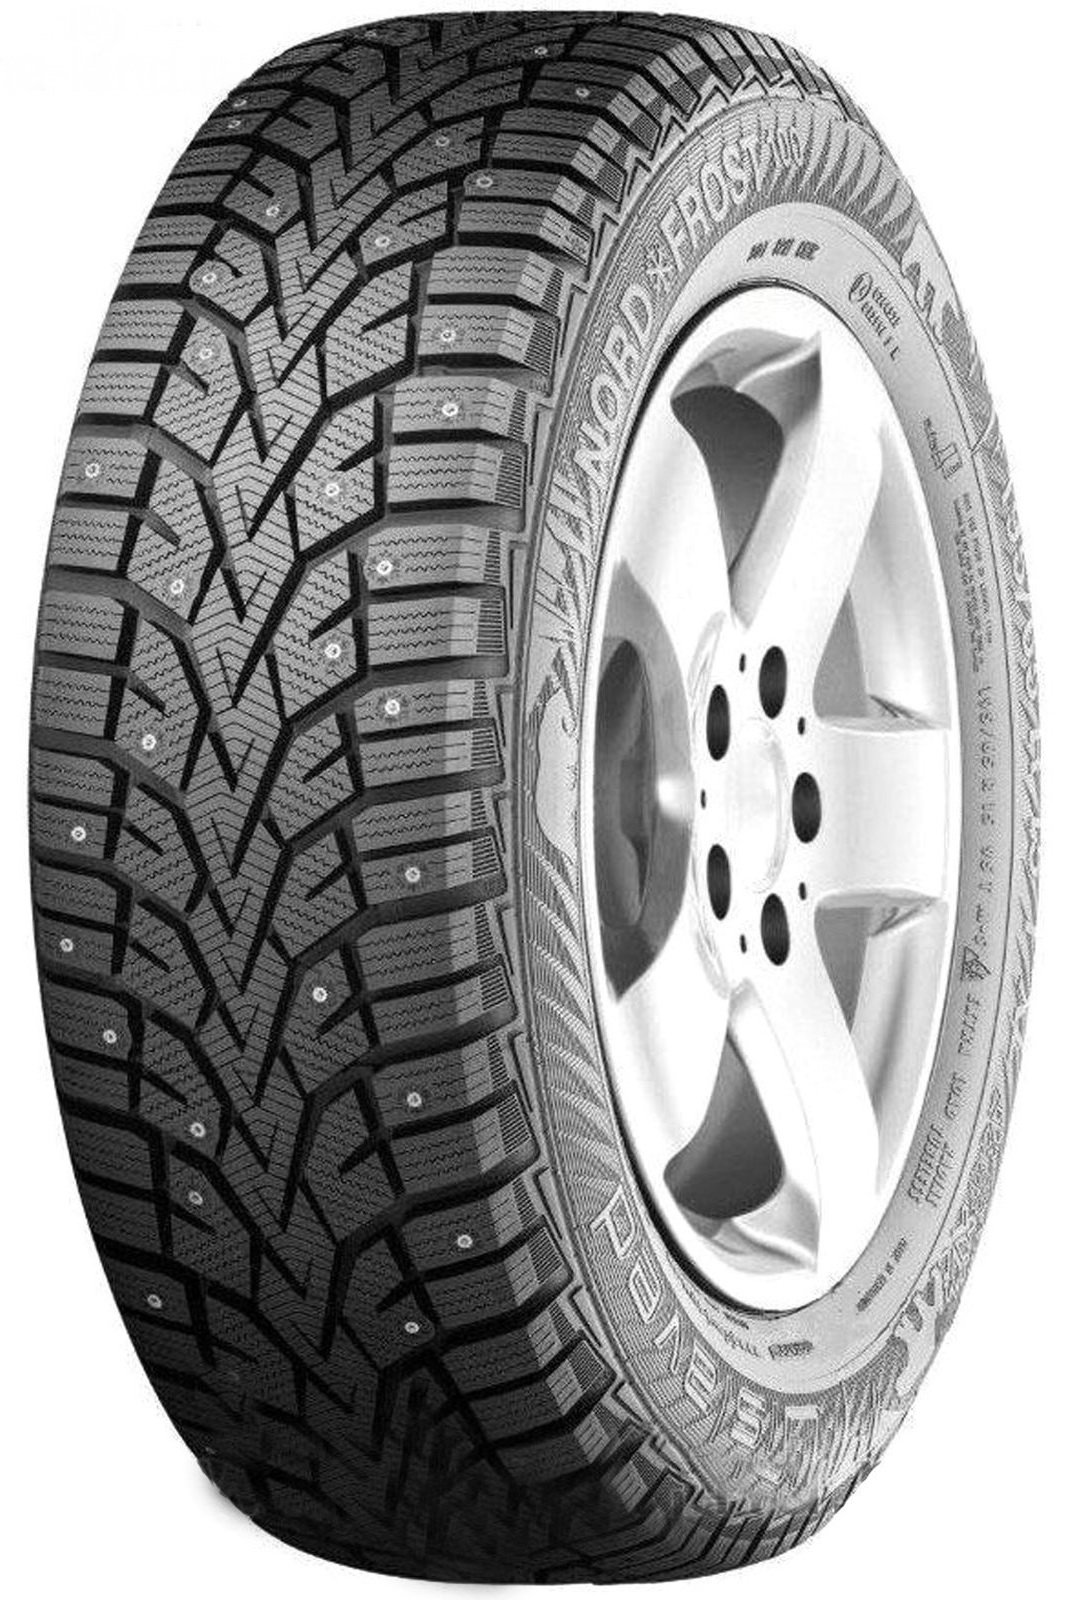 Gislaved 175/70R13 82T Nord*Frost 100 TL CD (.)